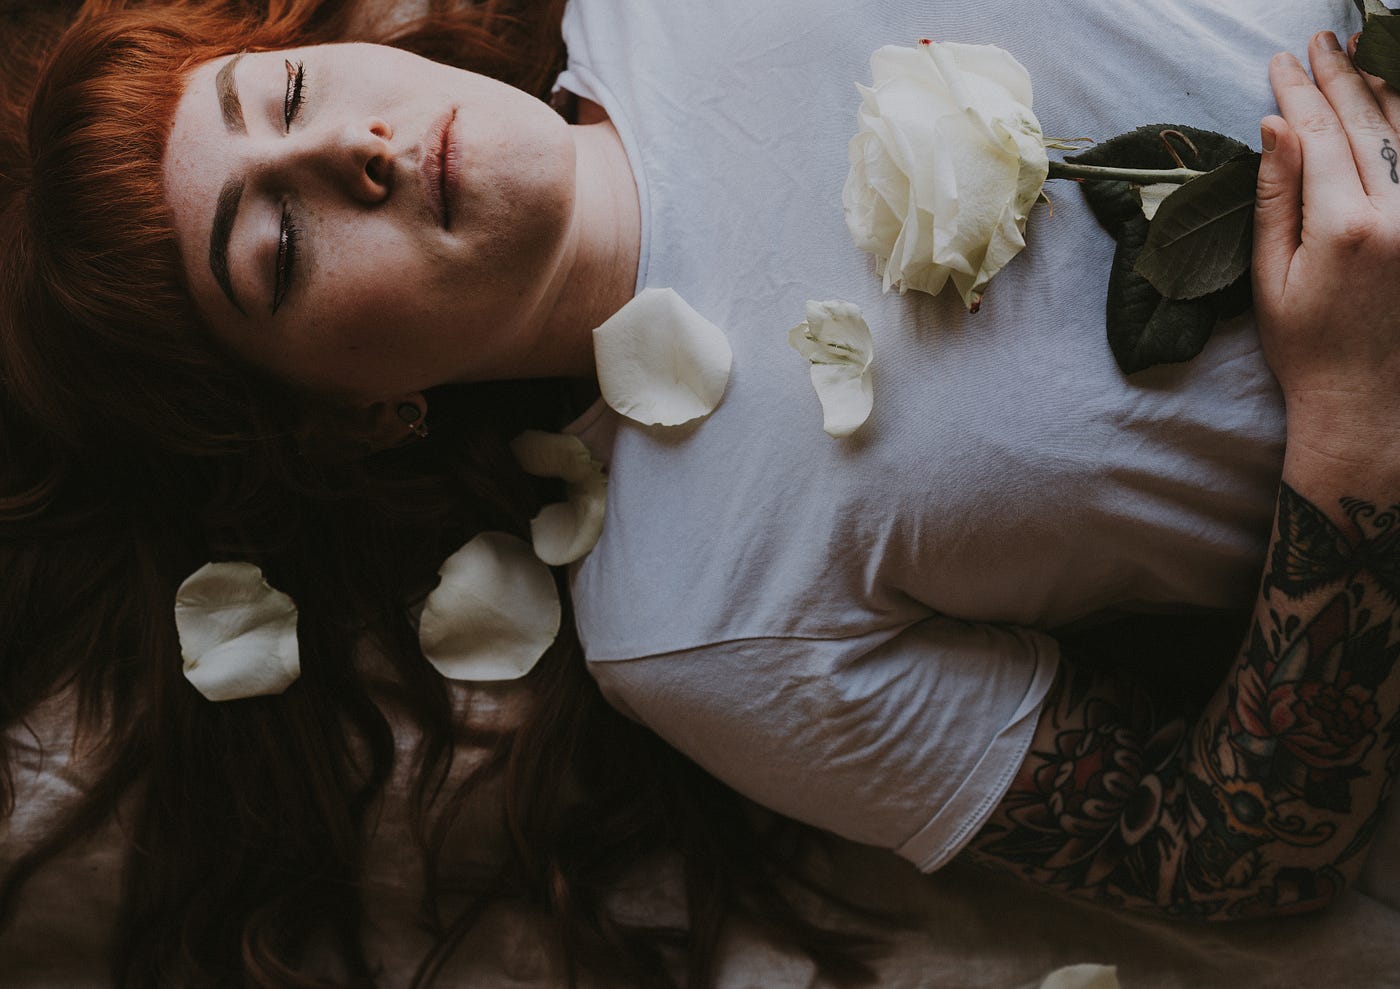 A red headed, fair skinned young woman lays eyes-closed on the ground, her hands holding a white rose, whose petals are scattered across her chest.